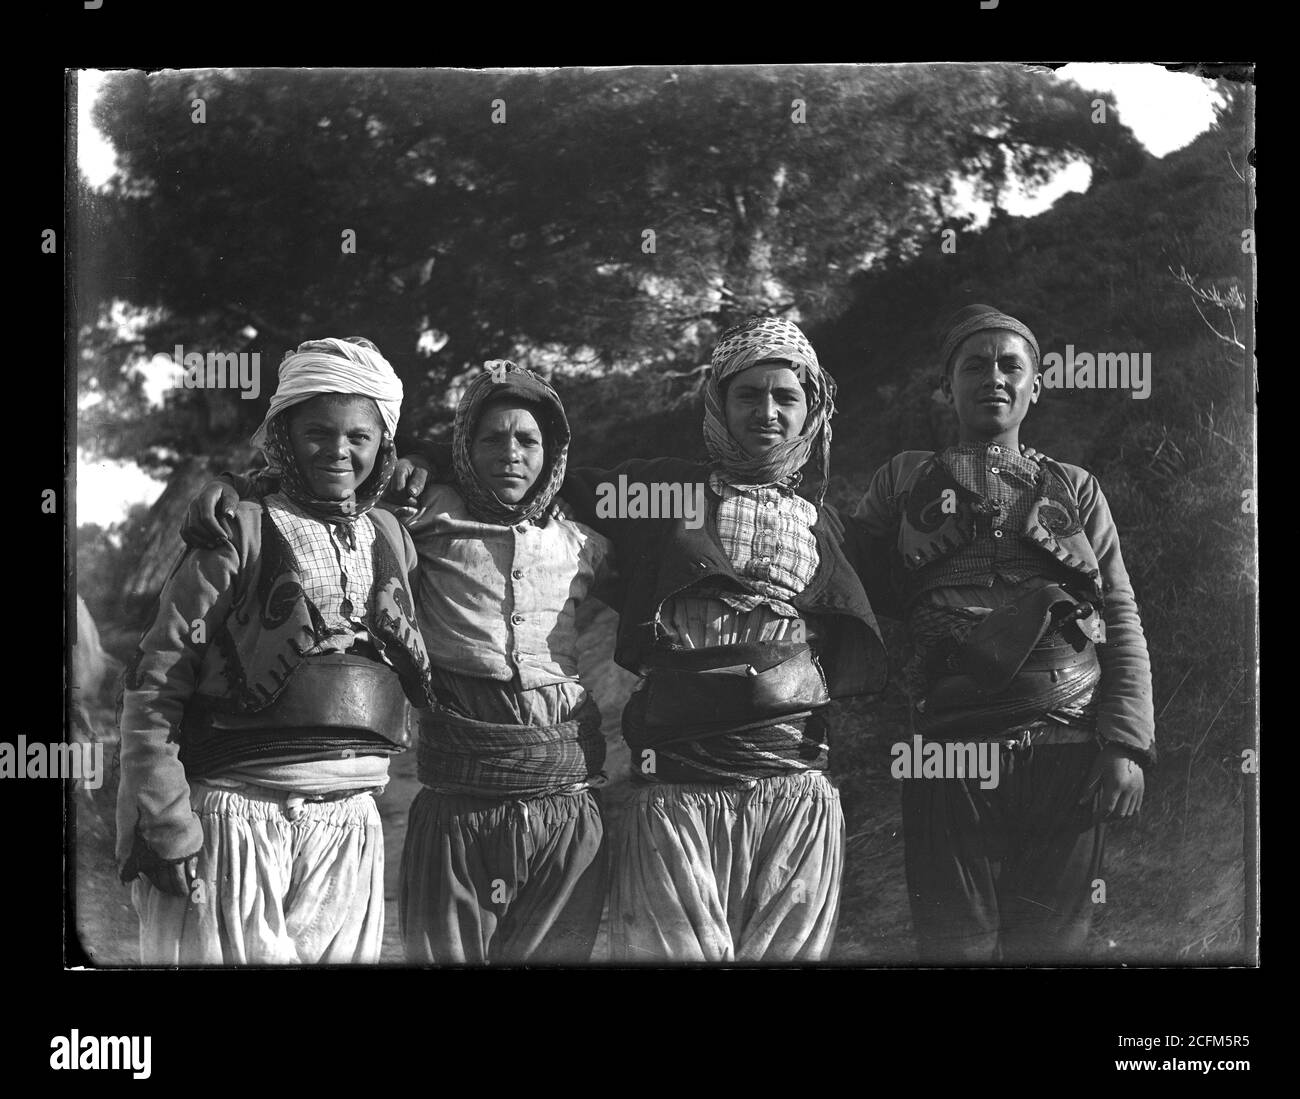 Group of young Albanian men in typical customes in or near Smyrna / Izmir Turkey. Photograph on dry glass plate from the Herry W. Schaefer collection, around 1910. Stock Photo